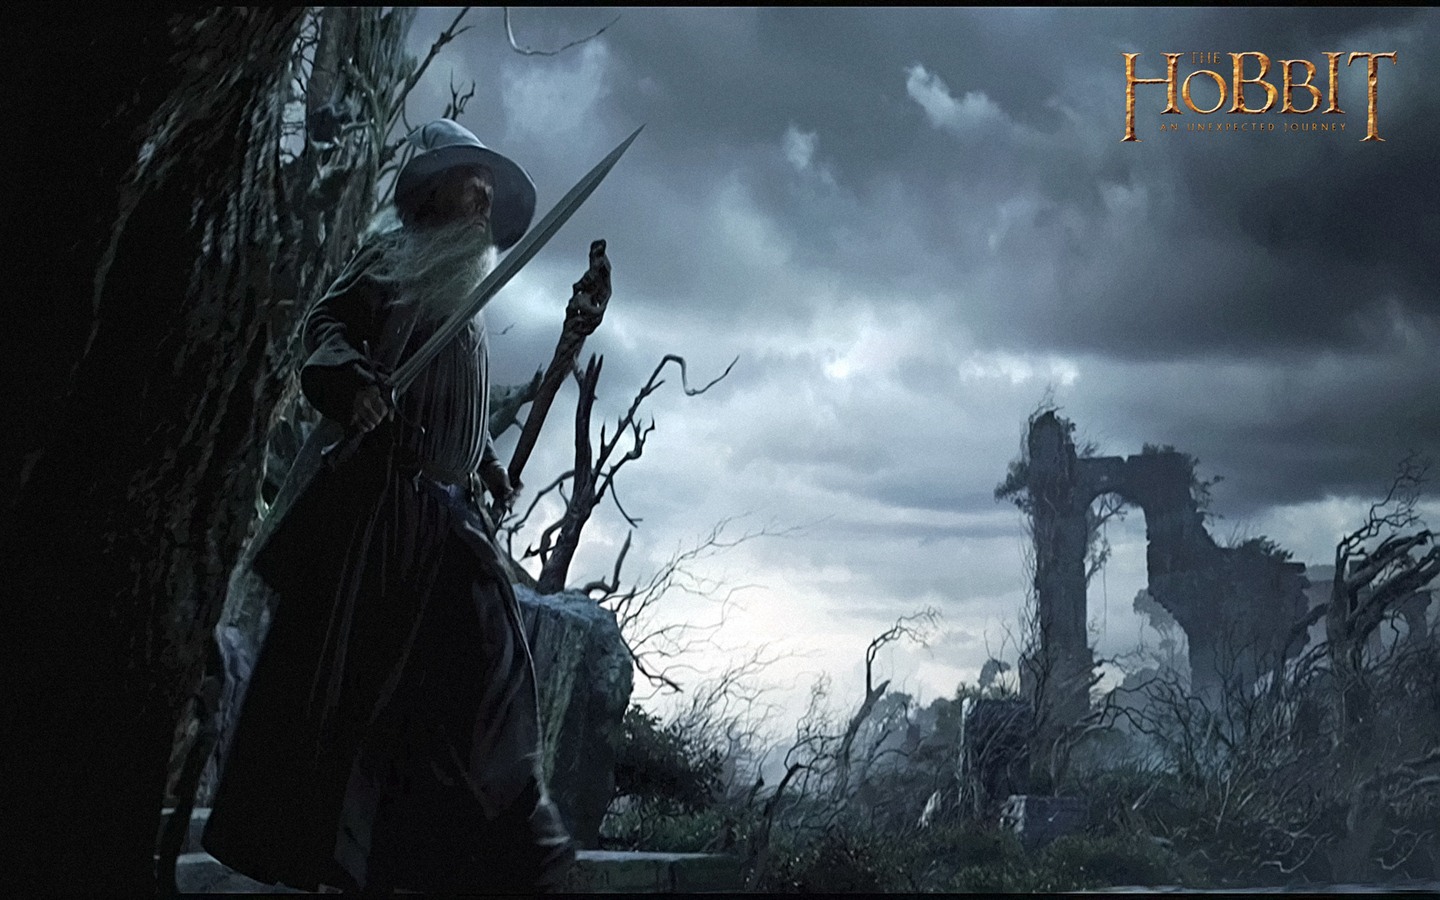 The Hobbit: An Unexpected Journey HD wallpapers #13 - 1440x900